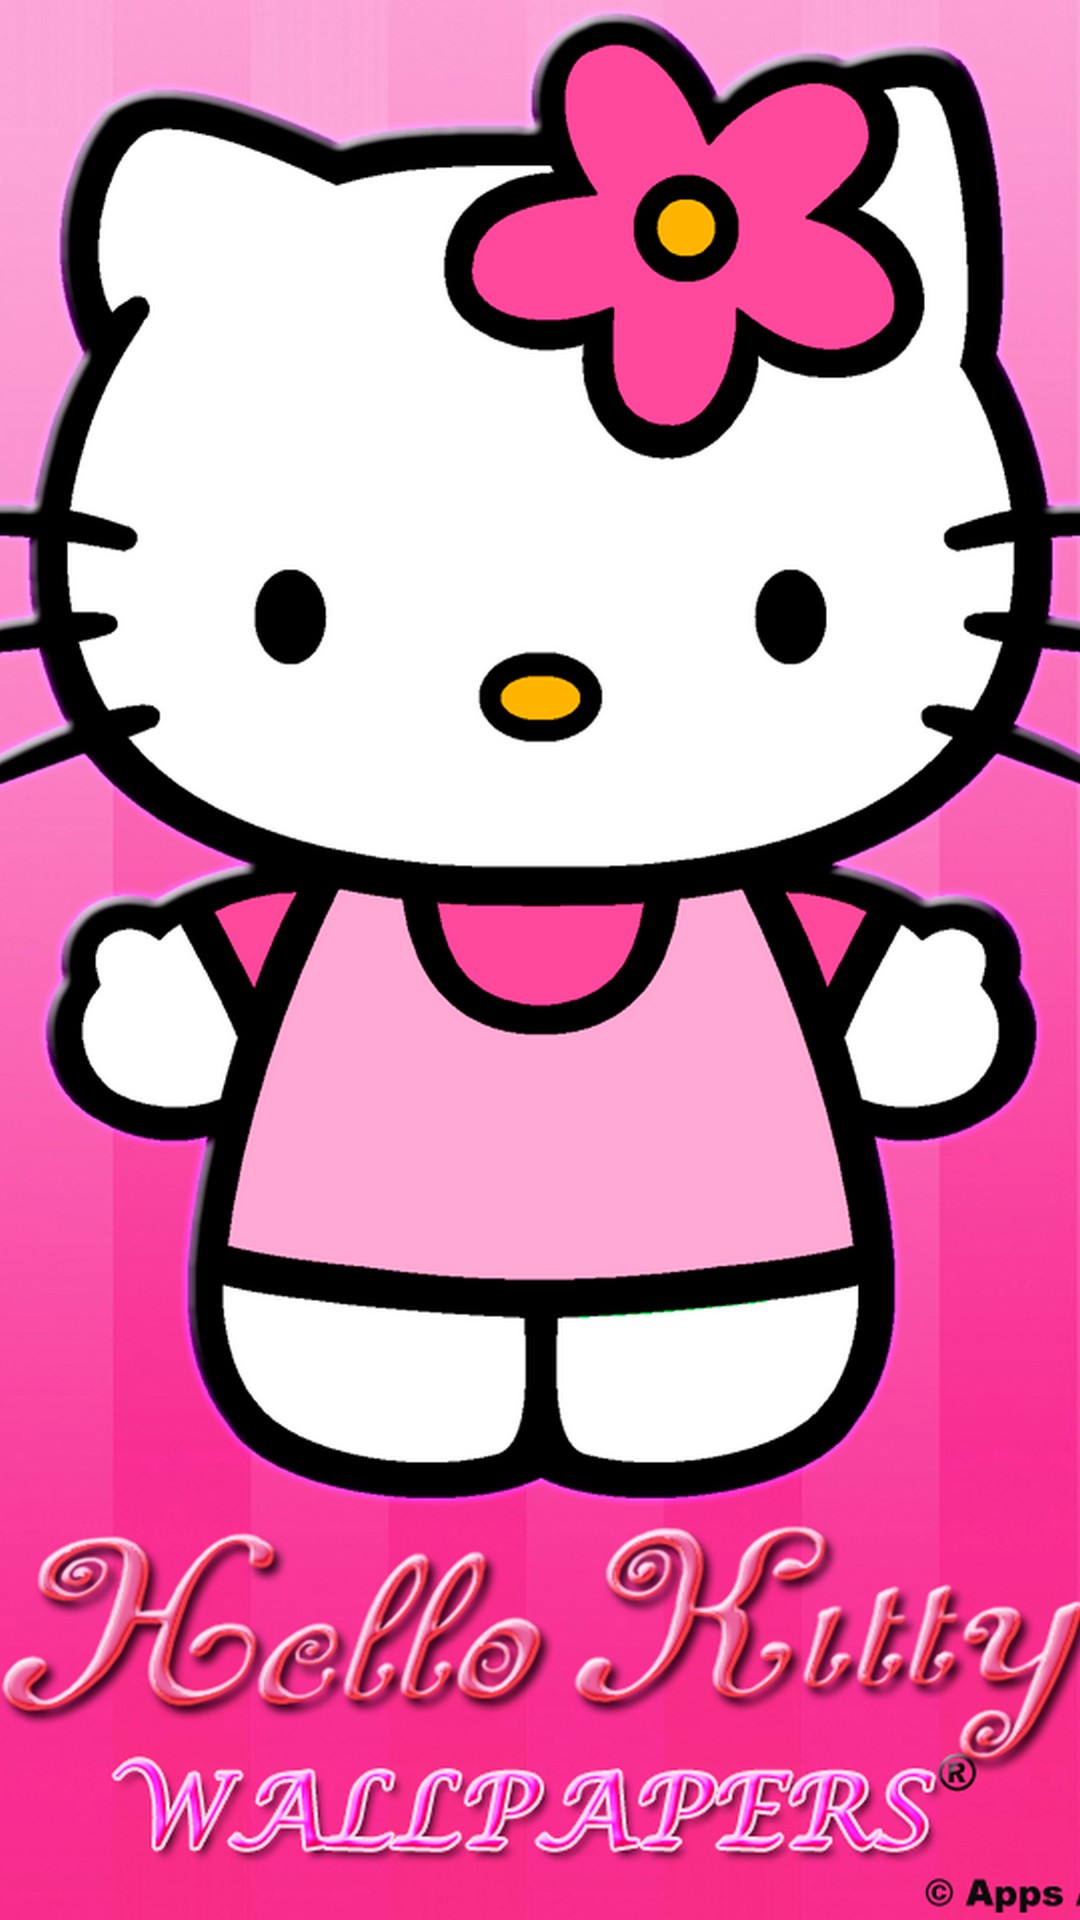 iPhone Wallpaper HD Hello Kitty With Resolution 1080X1920 pixel. You can make this wallpaper for your Desktop Computer Backgrounds, Mac Wallpapers, Android Lock screen or iPhone Screensavers